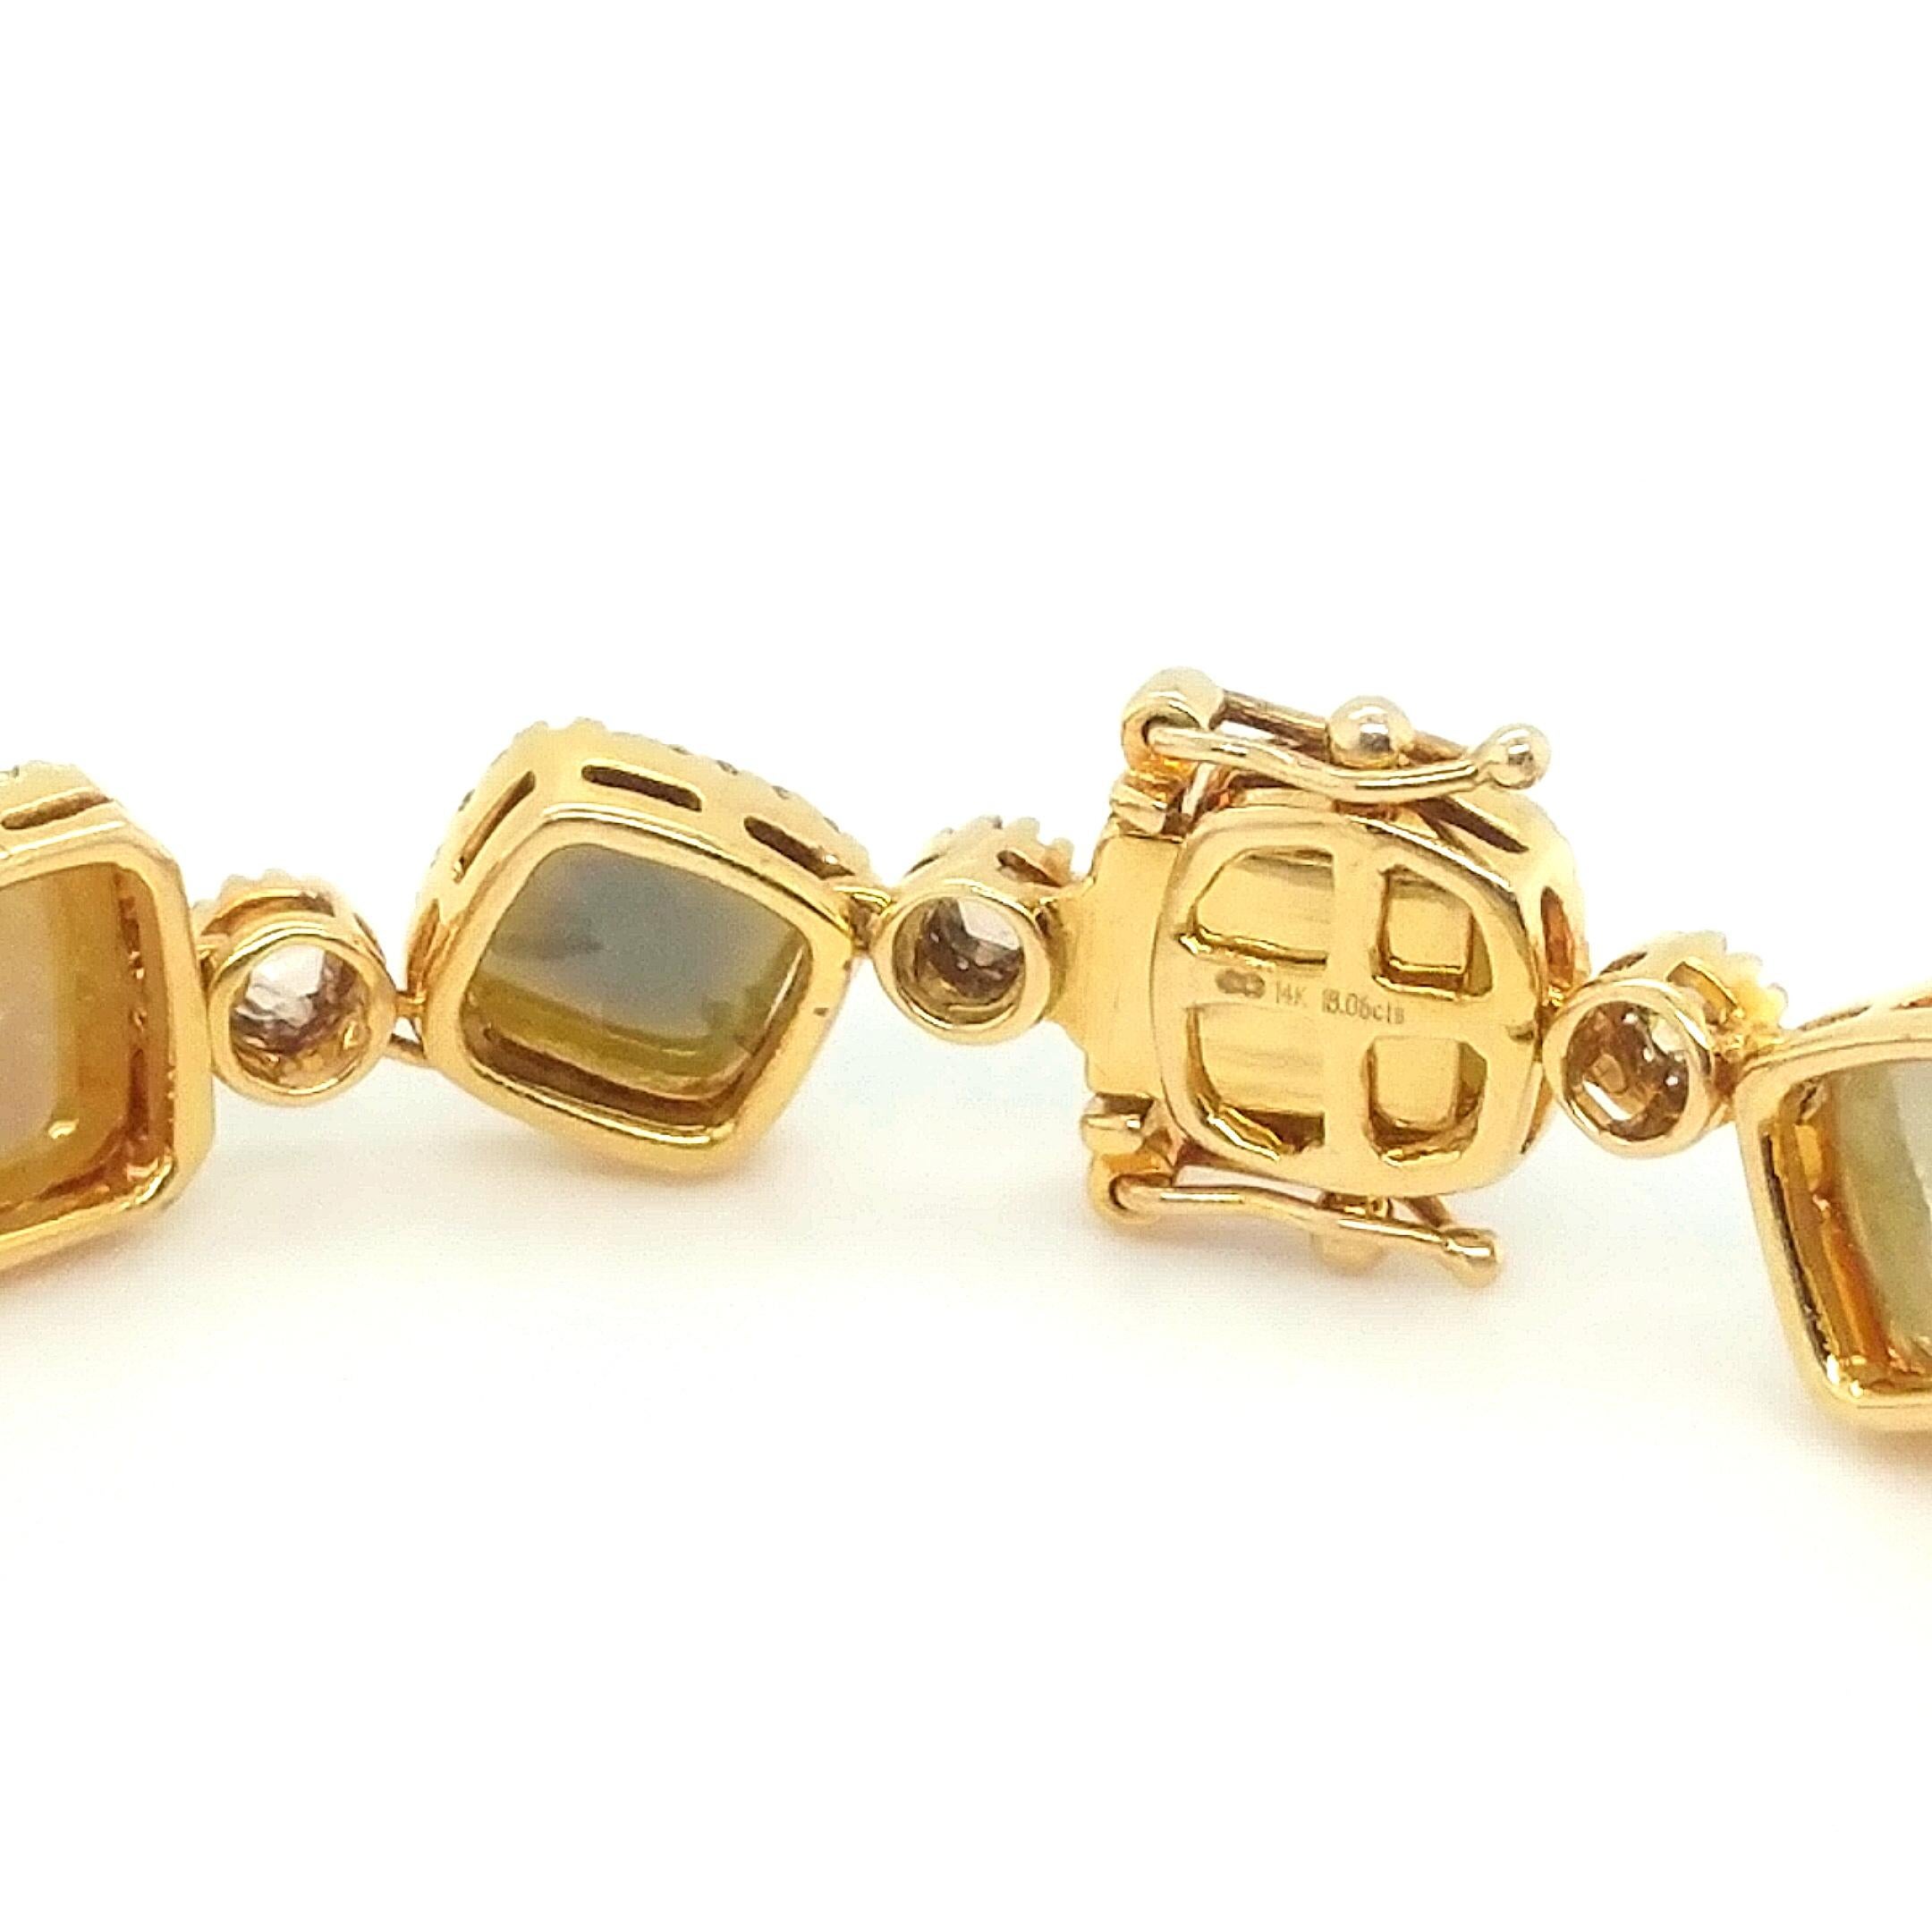 A beautiful bracelet featuring Cushion & Rose Cut Gray, Yellow & Orangy-Yellow Diamonds, 0.61 Carats of Single Cut Yellow Diamonds & Rose Cut & Round Diamonds. Some of the fancy colored stones are treated to enhance the color. All the diamonds are